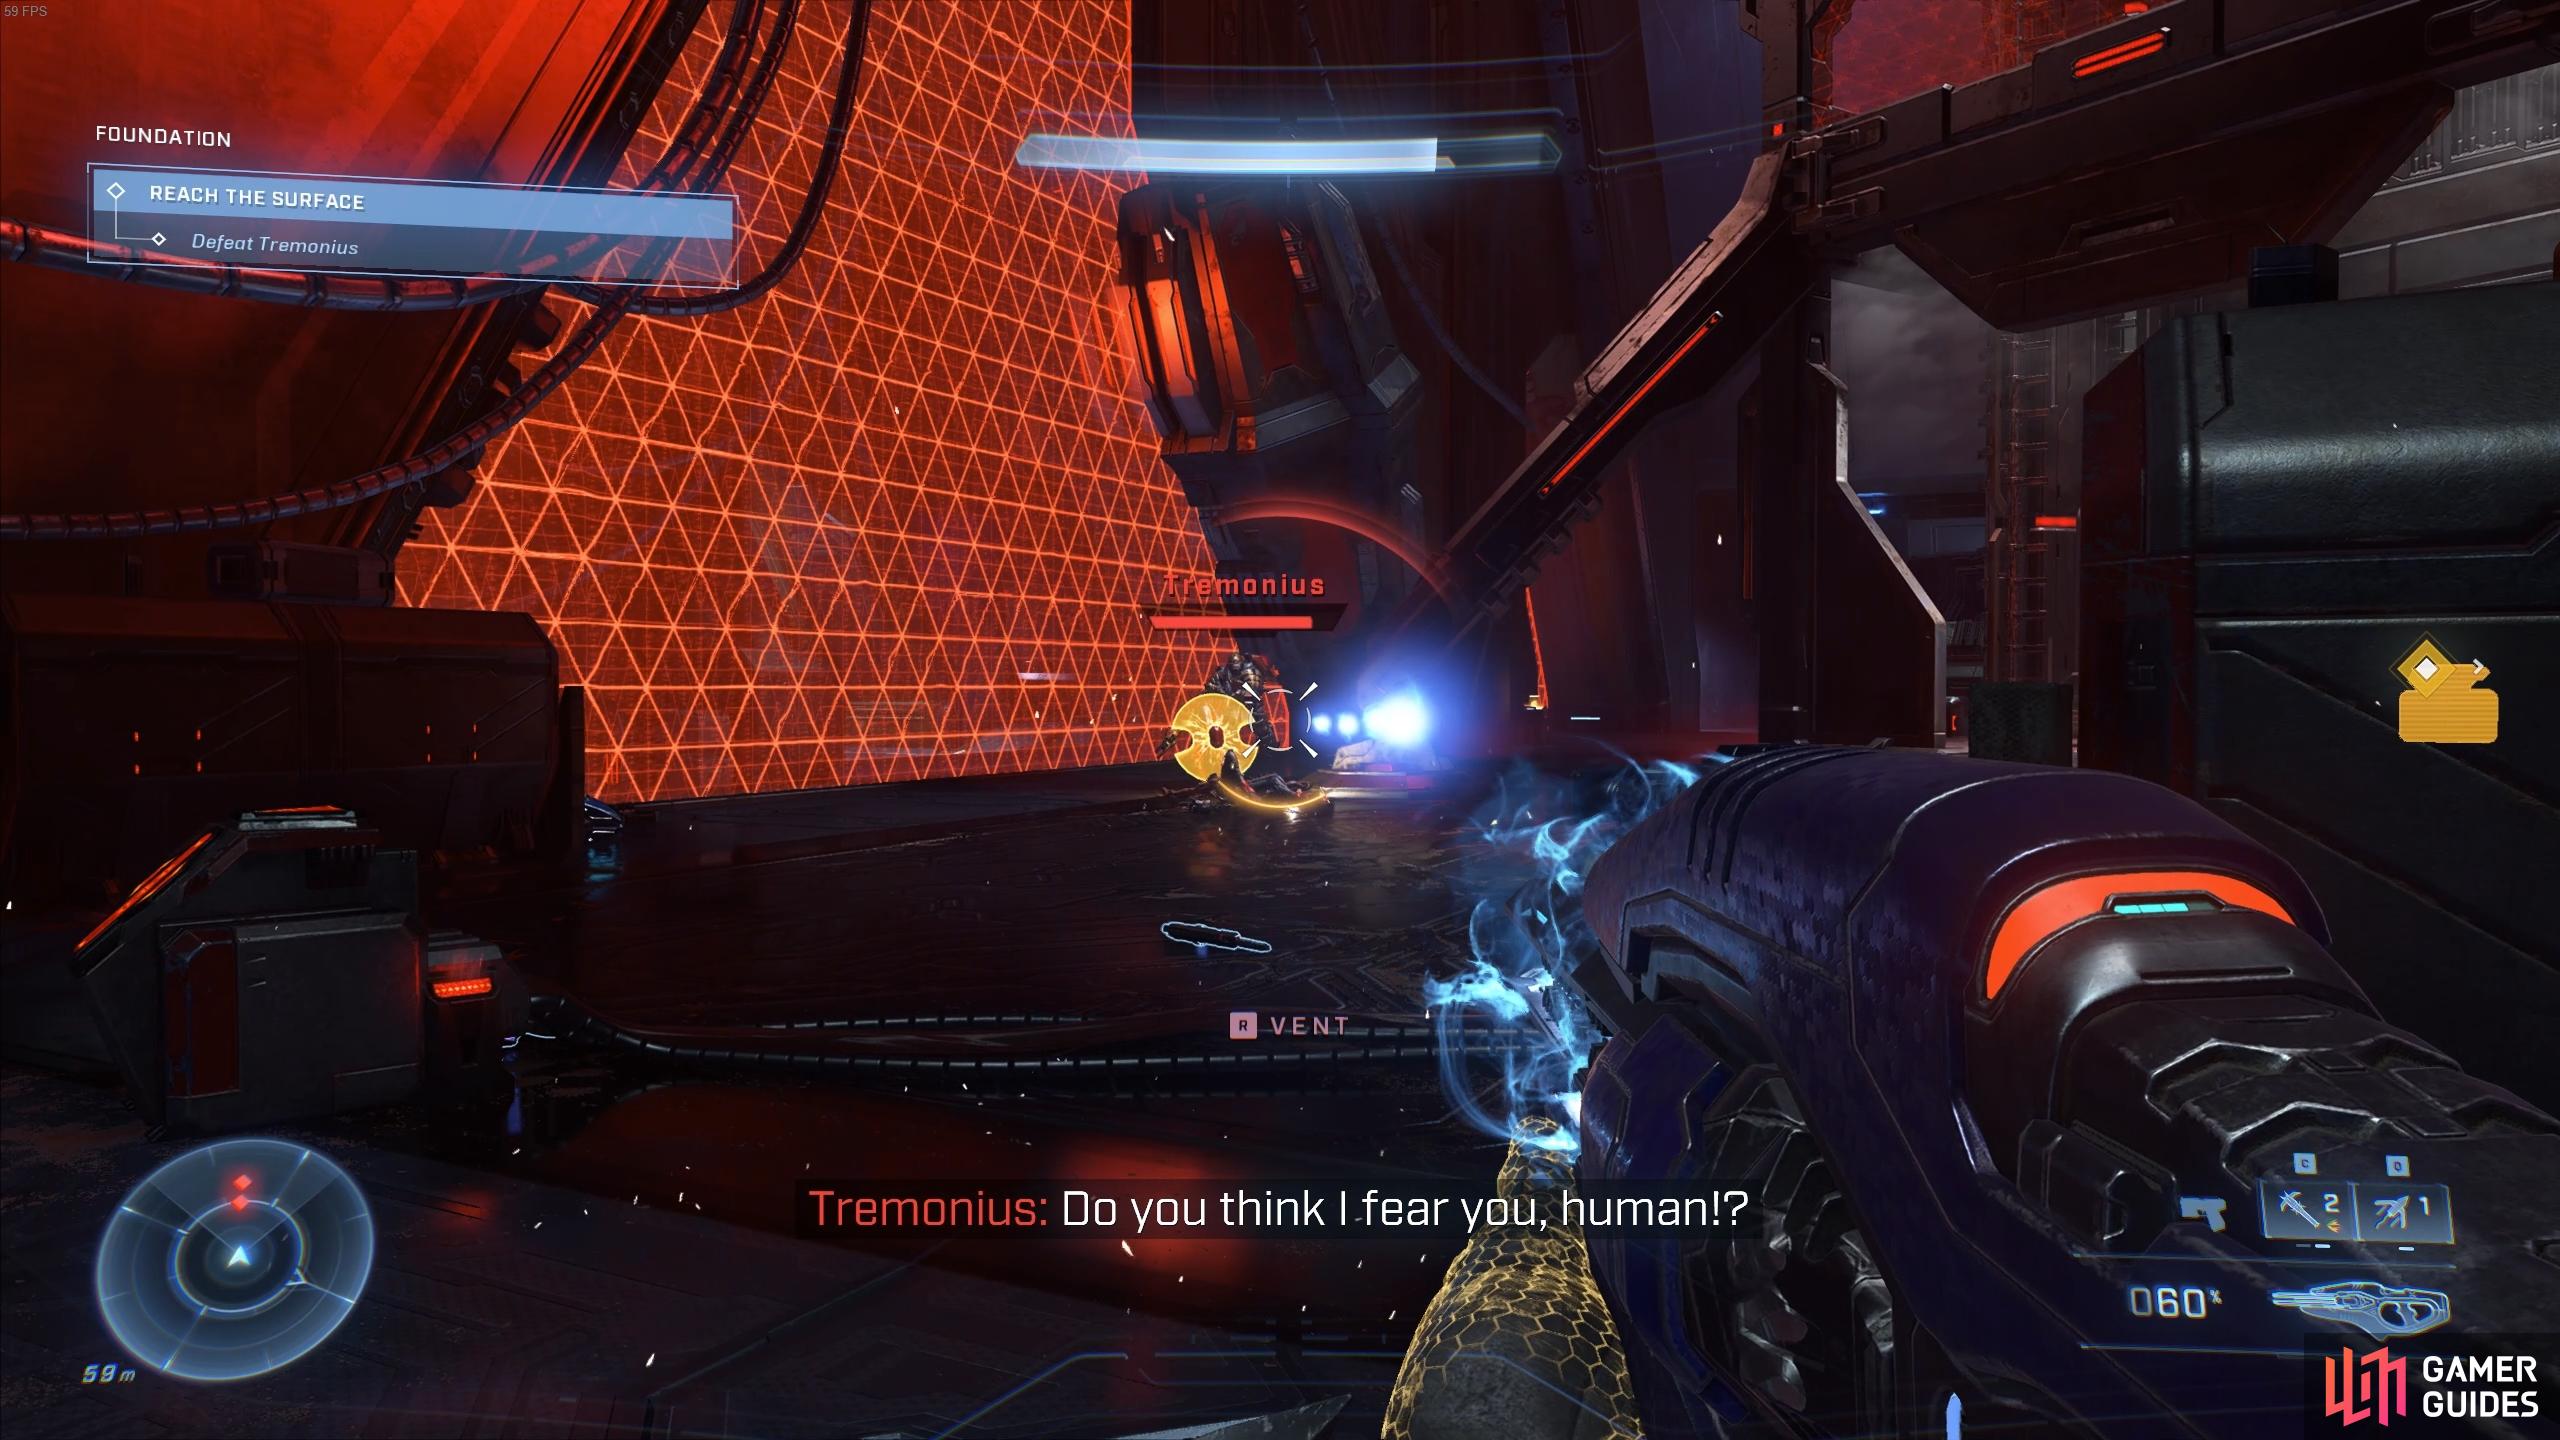 Take out the Jackals as soon as possible with the Pulse Carbine.